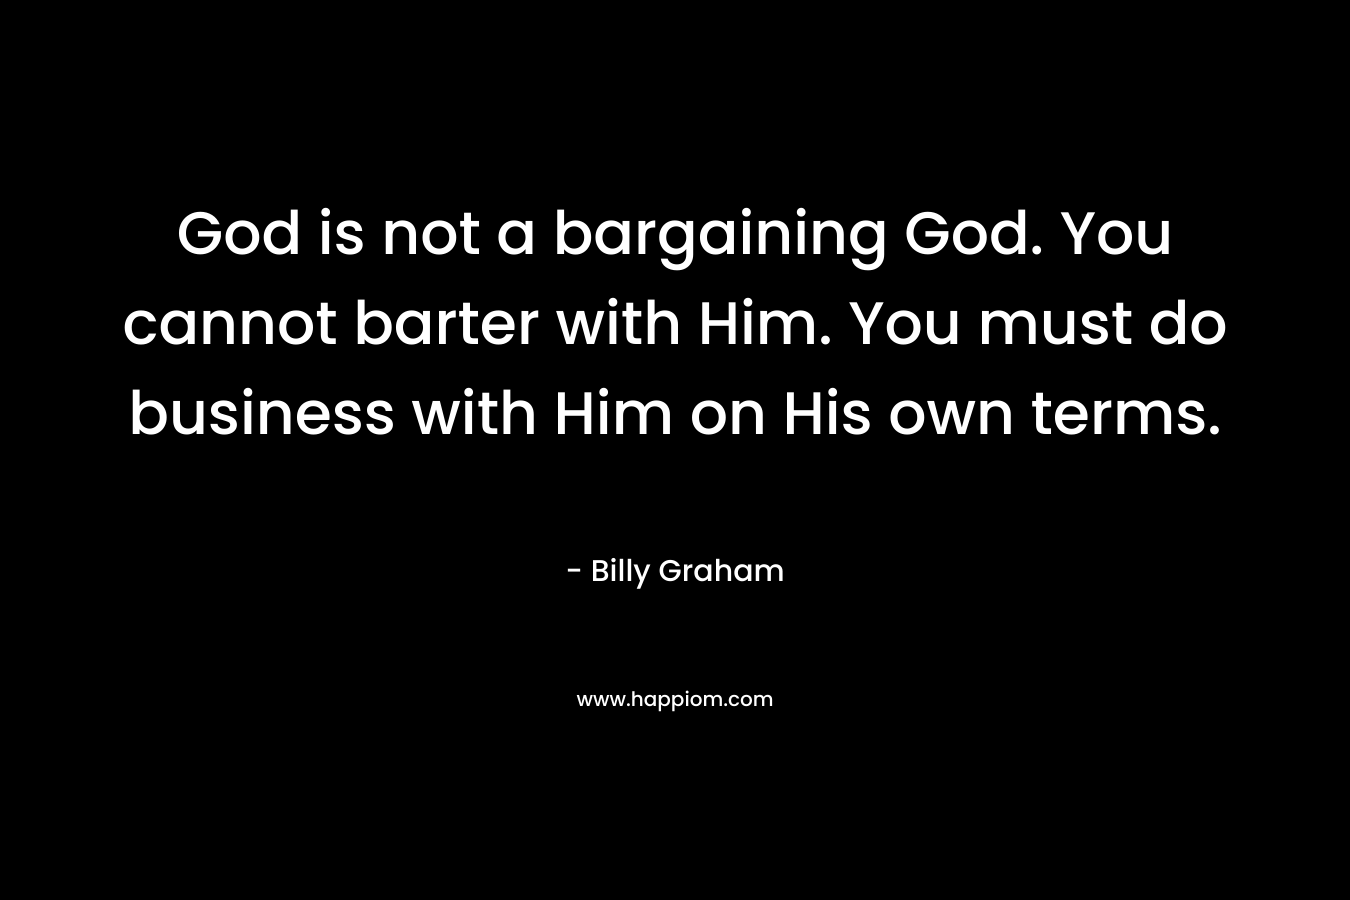 God is not a bargaining God. You cannot barter with Him. You must do business with Him on His own terms. – Billy Graham